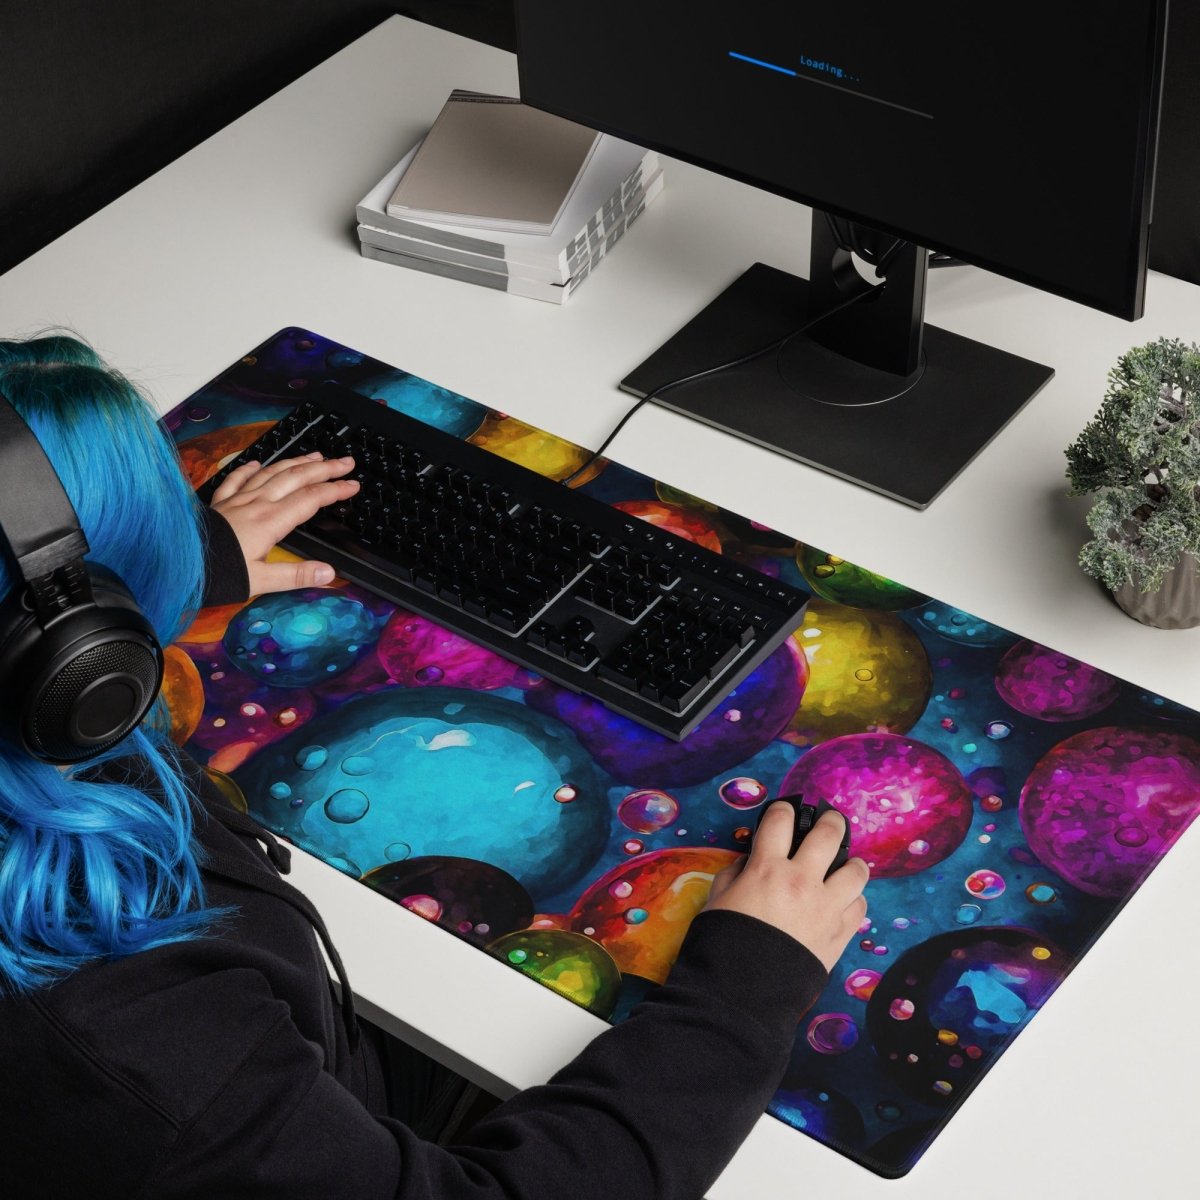 Planetary marbles - Gaming mouse pad - Ever colorful